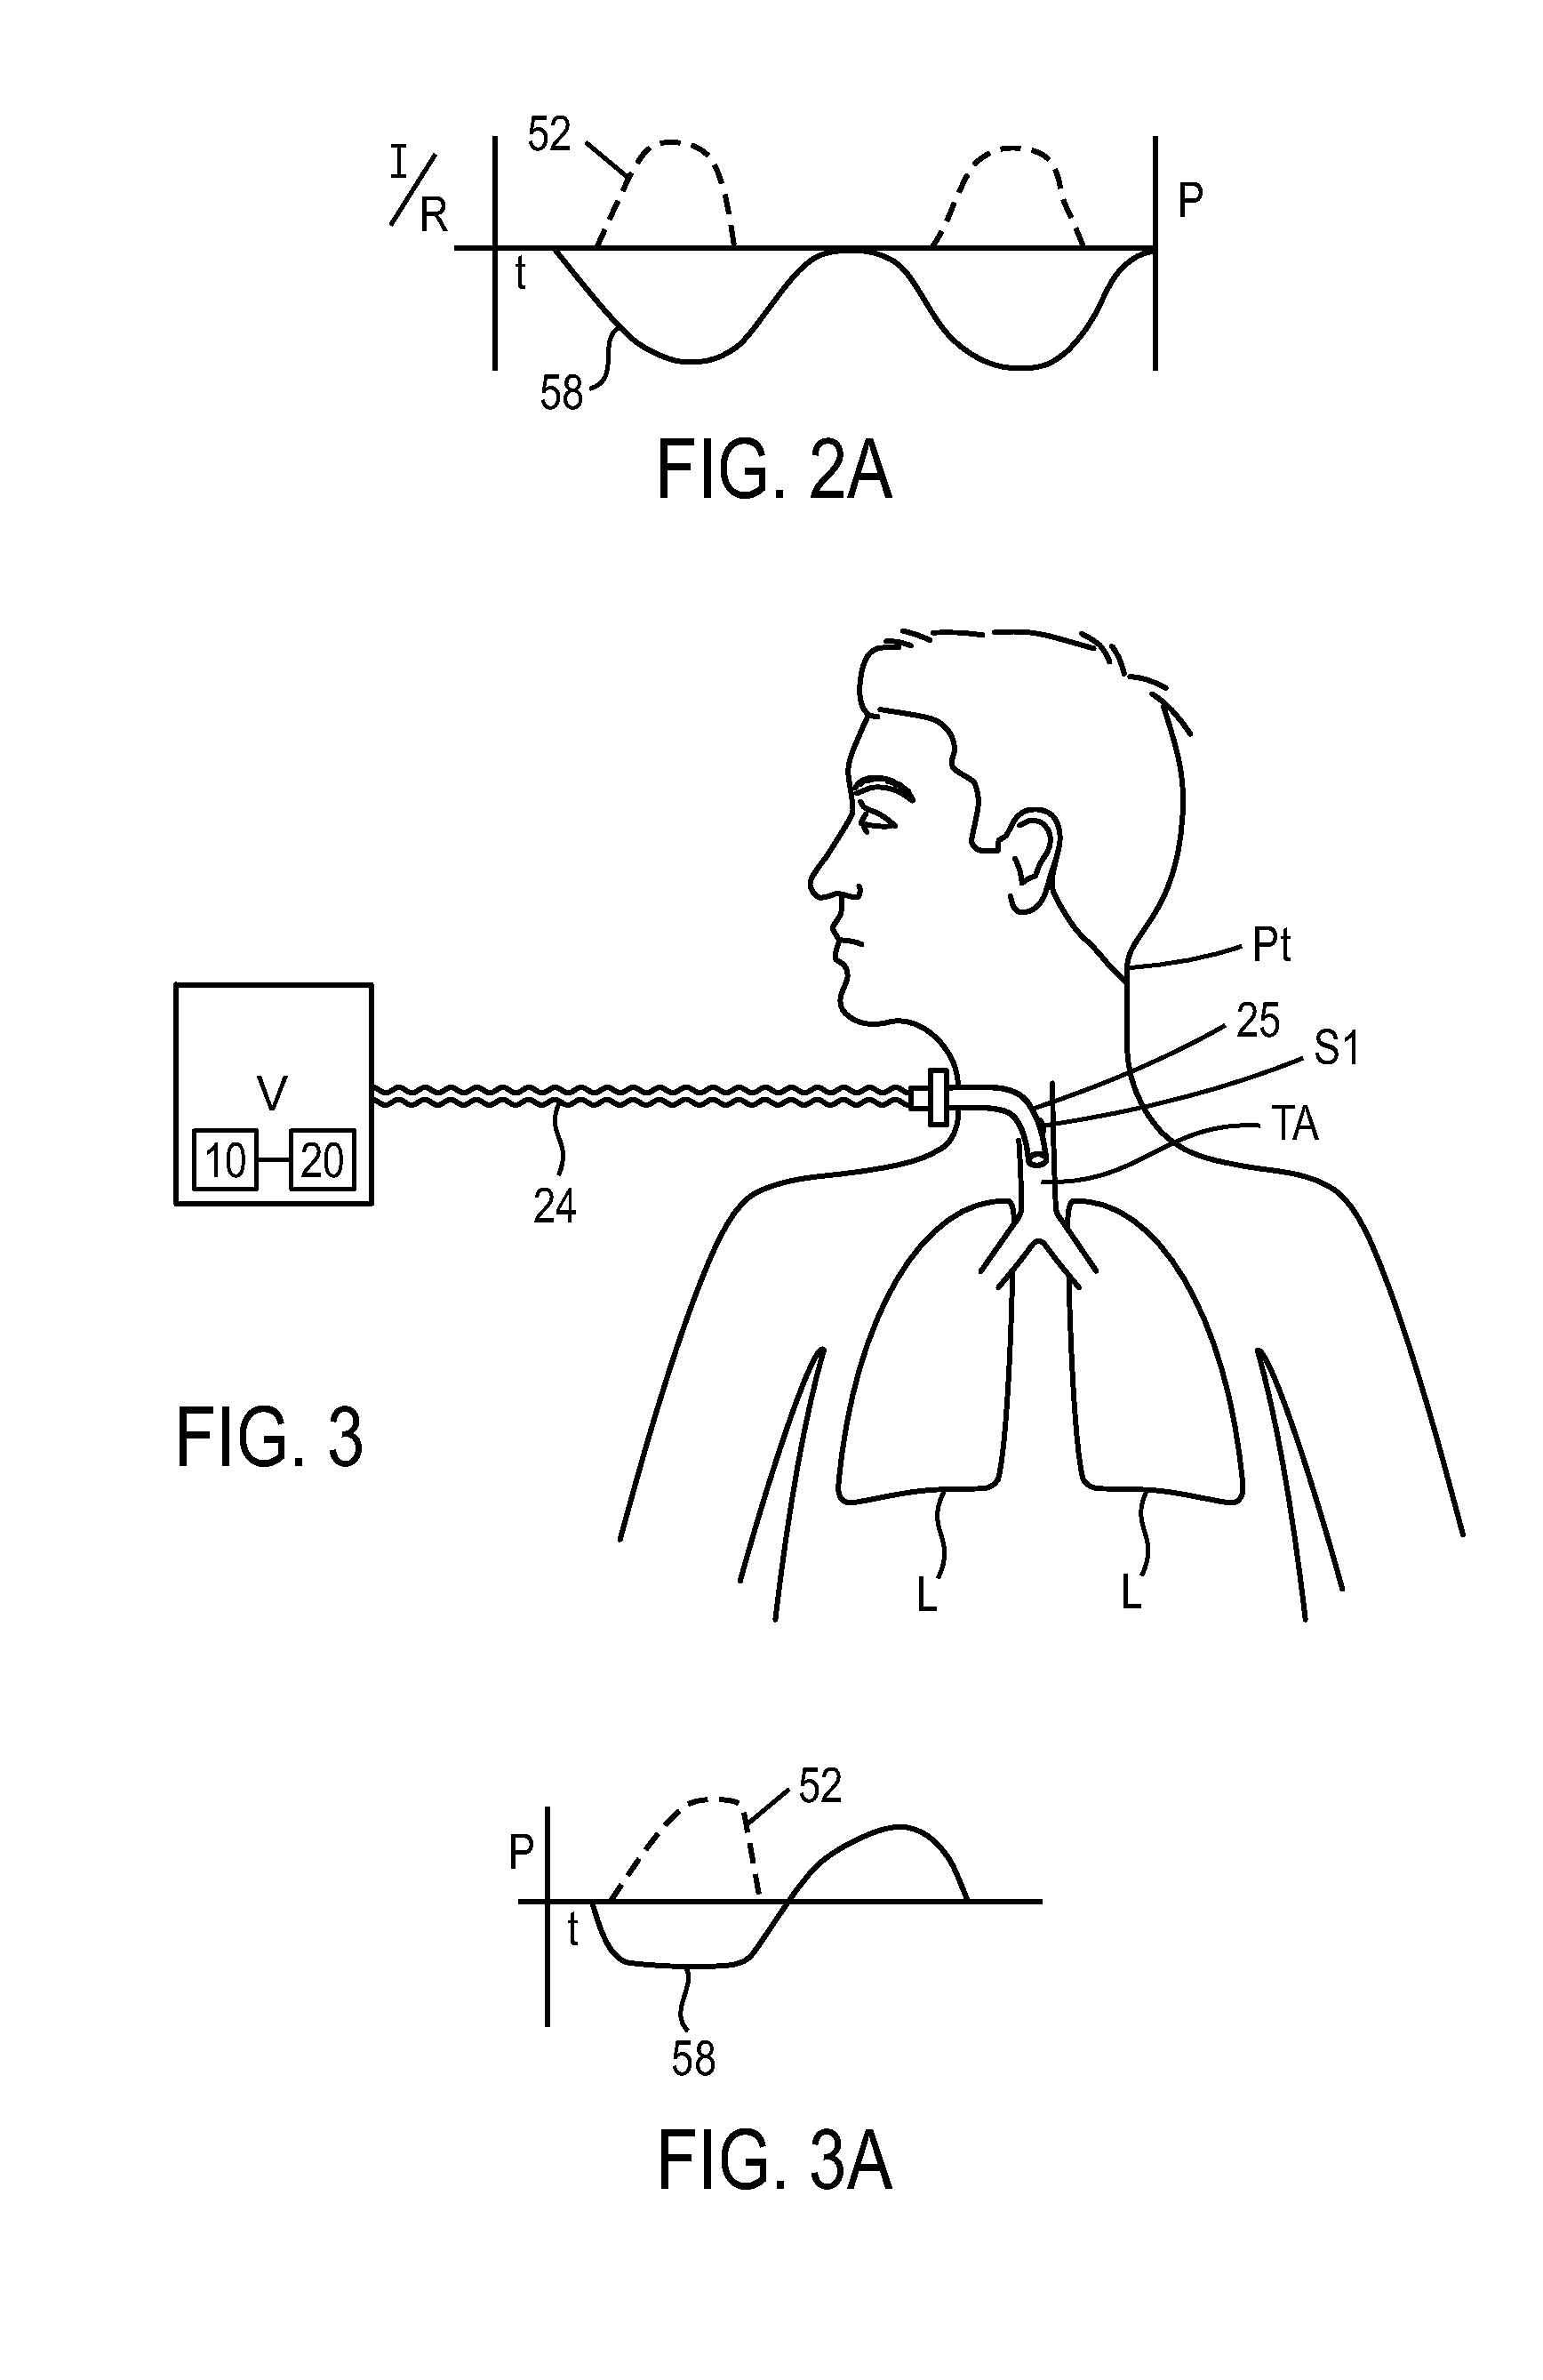 Methods and devices for sensing respiration and controlling ventilator functions